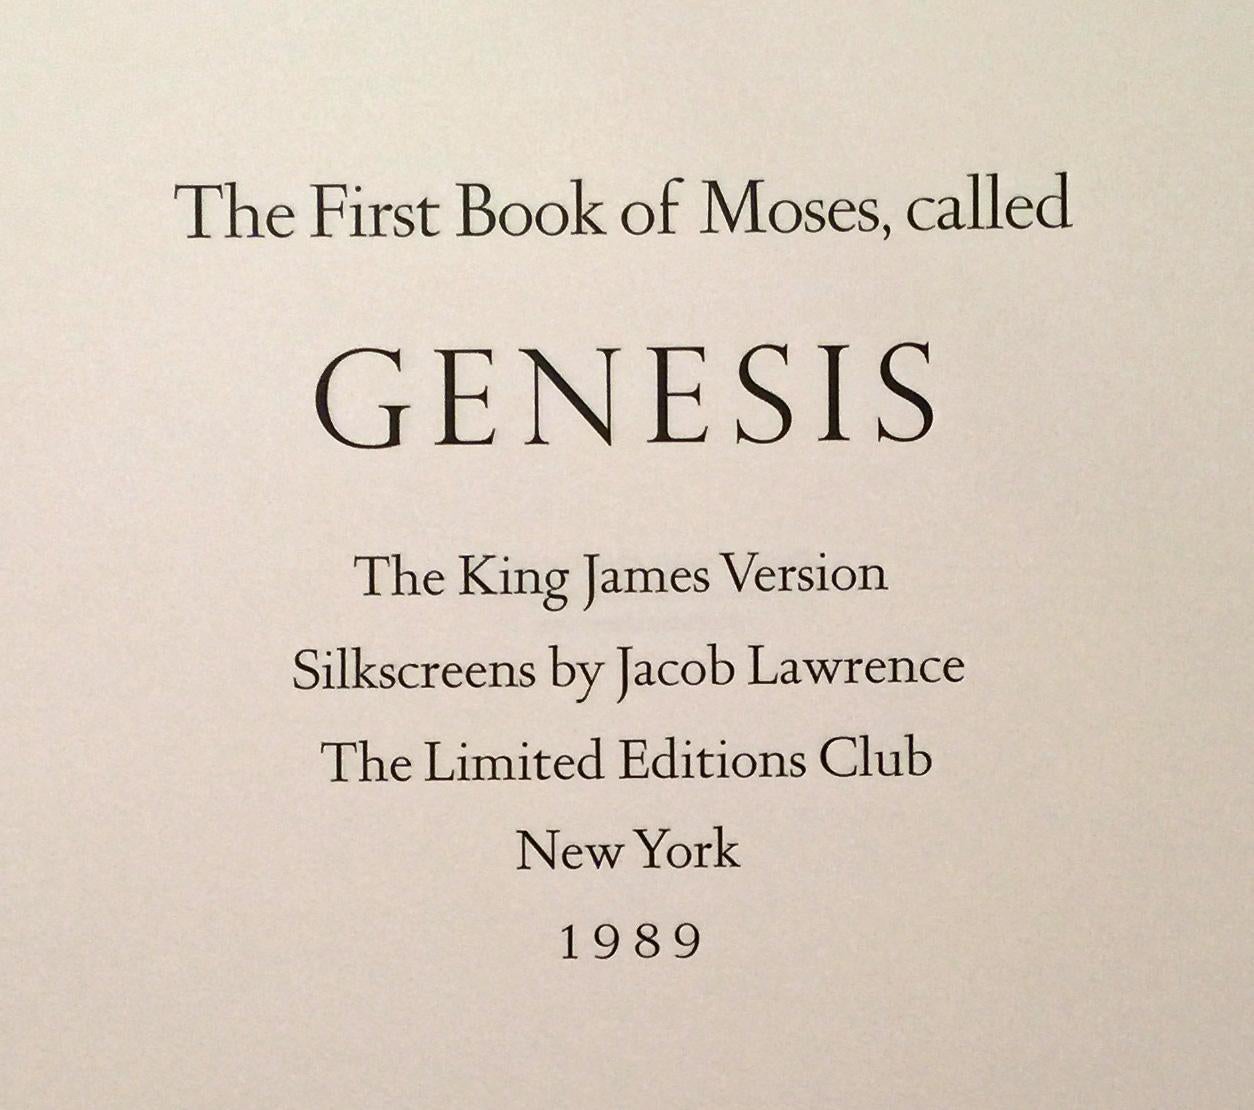 THE FIRST BOOK OF MOSES, CALLED GENESIS.  2